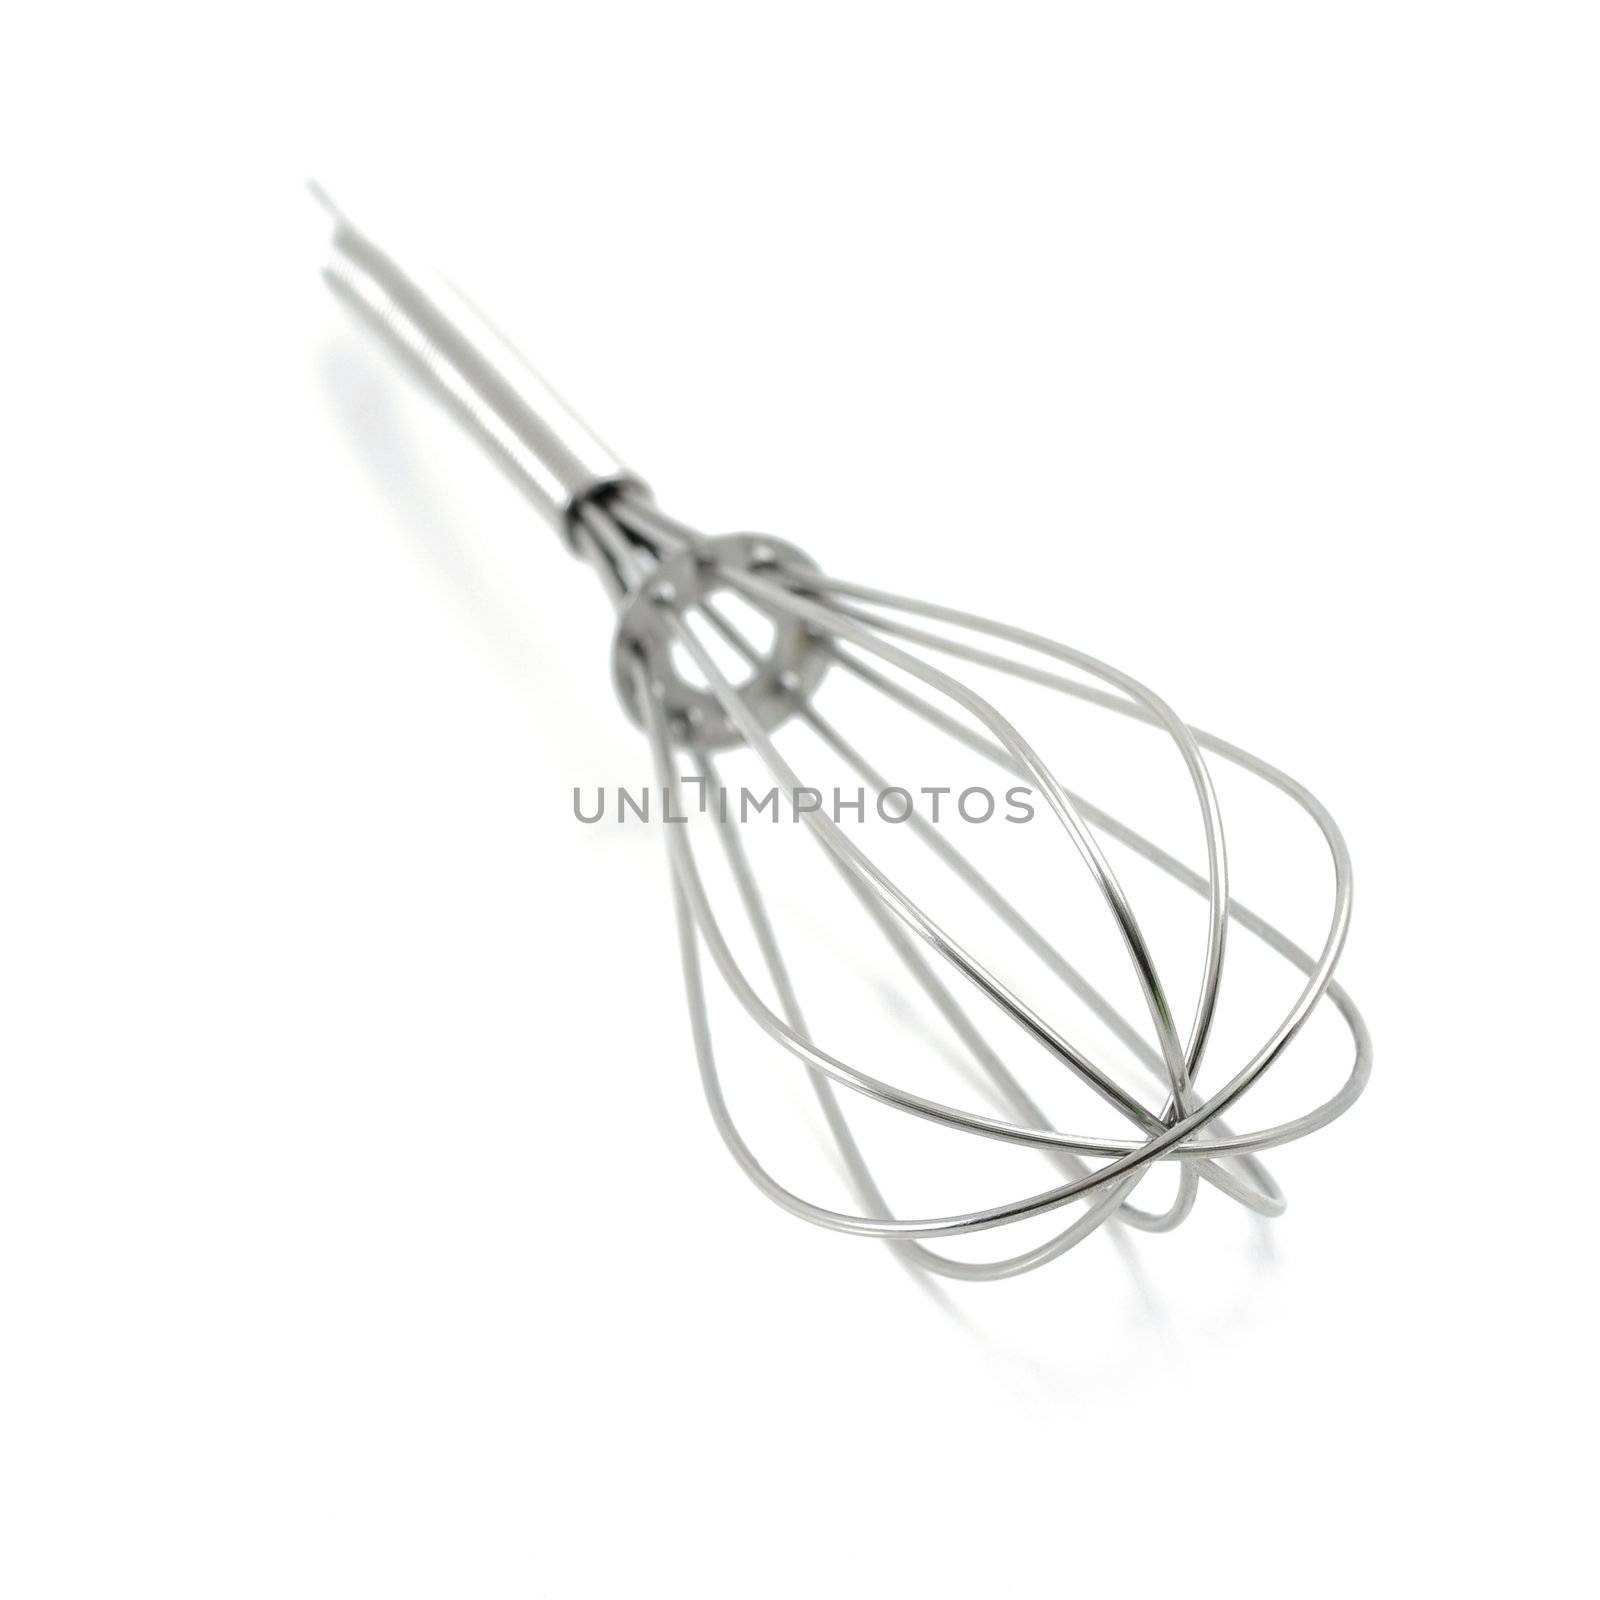 Stainless steel whisk by antpkr